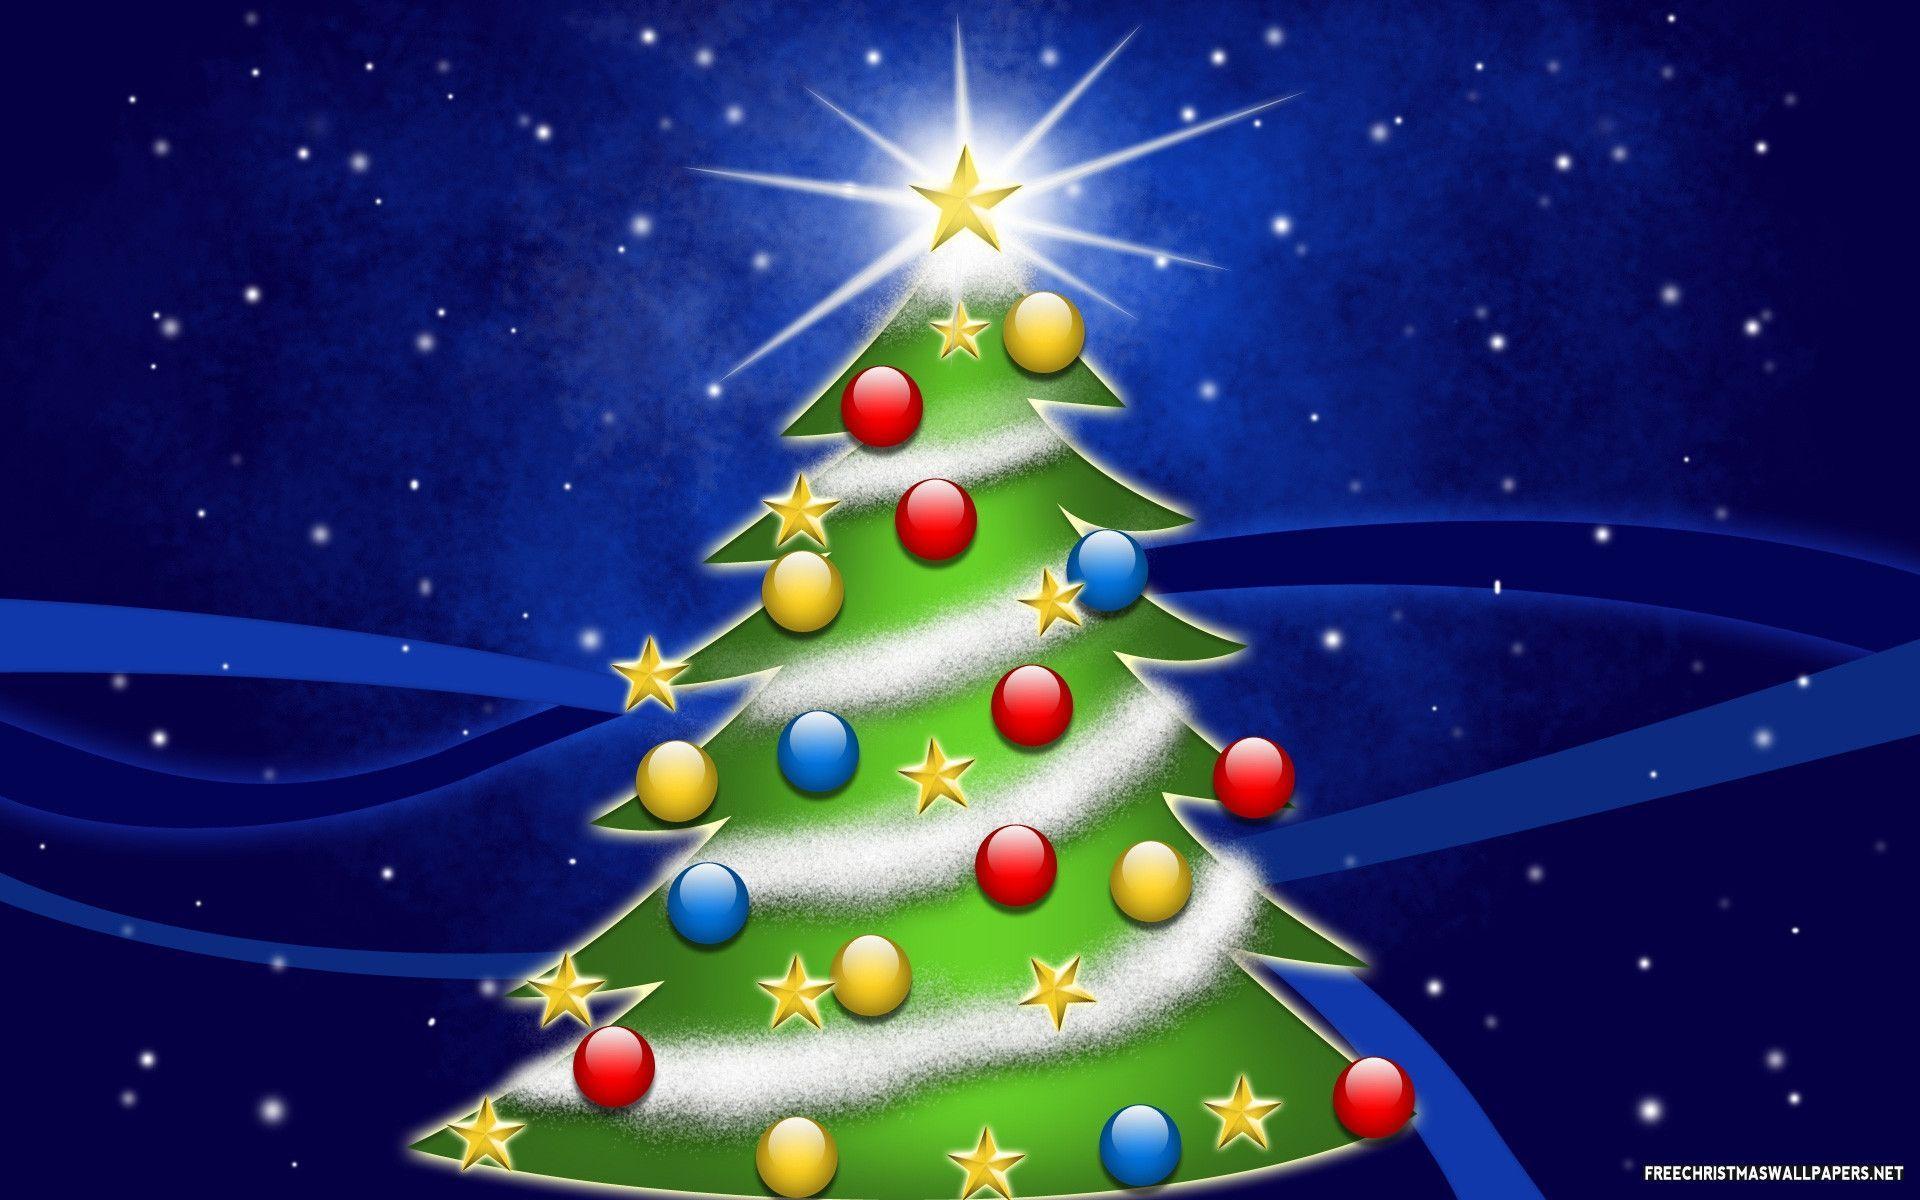 Christmas Tree Wallpaper Backgrounds - Wallpaper Cave